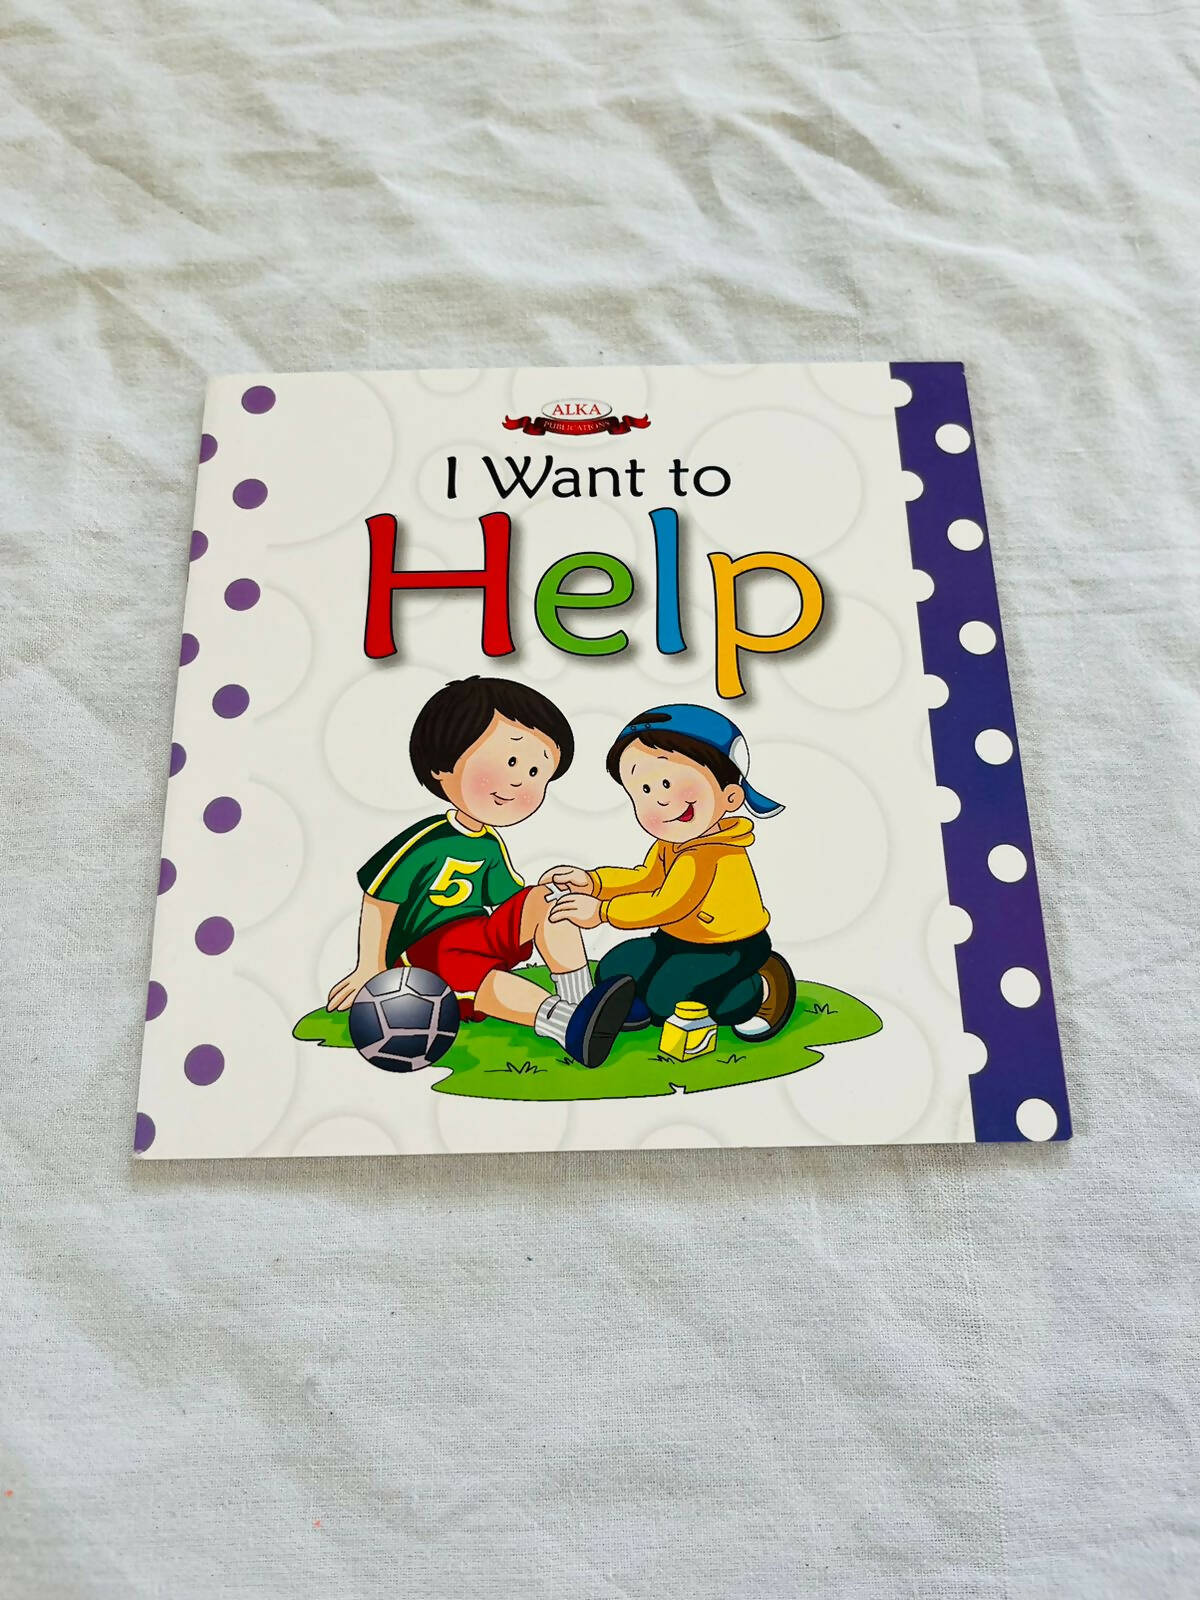 Empower your child to dream big with 'I WANT TO' Books for Kids - inspiring stories that ignite imagination and encourage goal-setting!